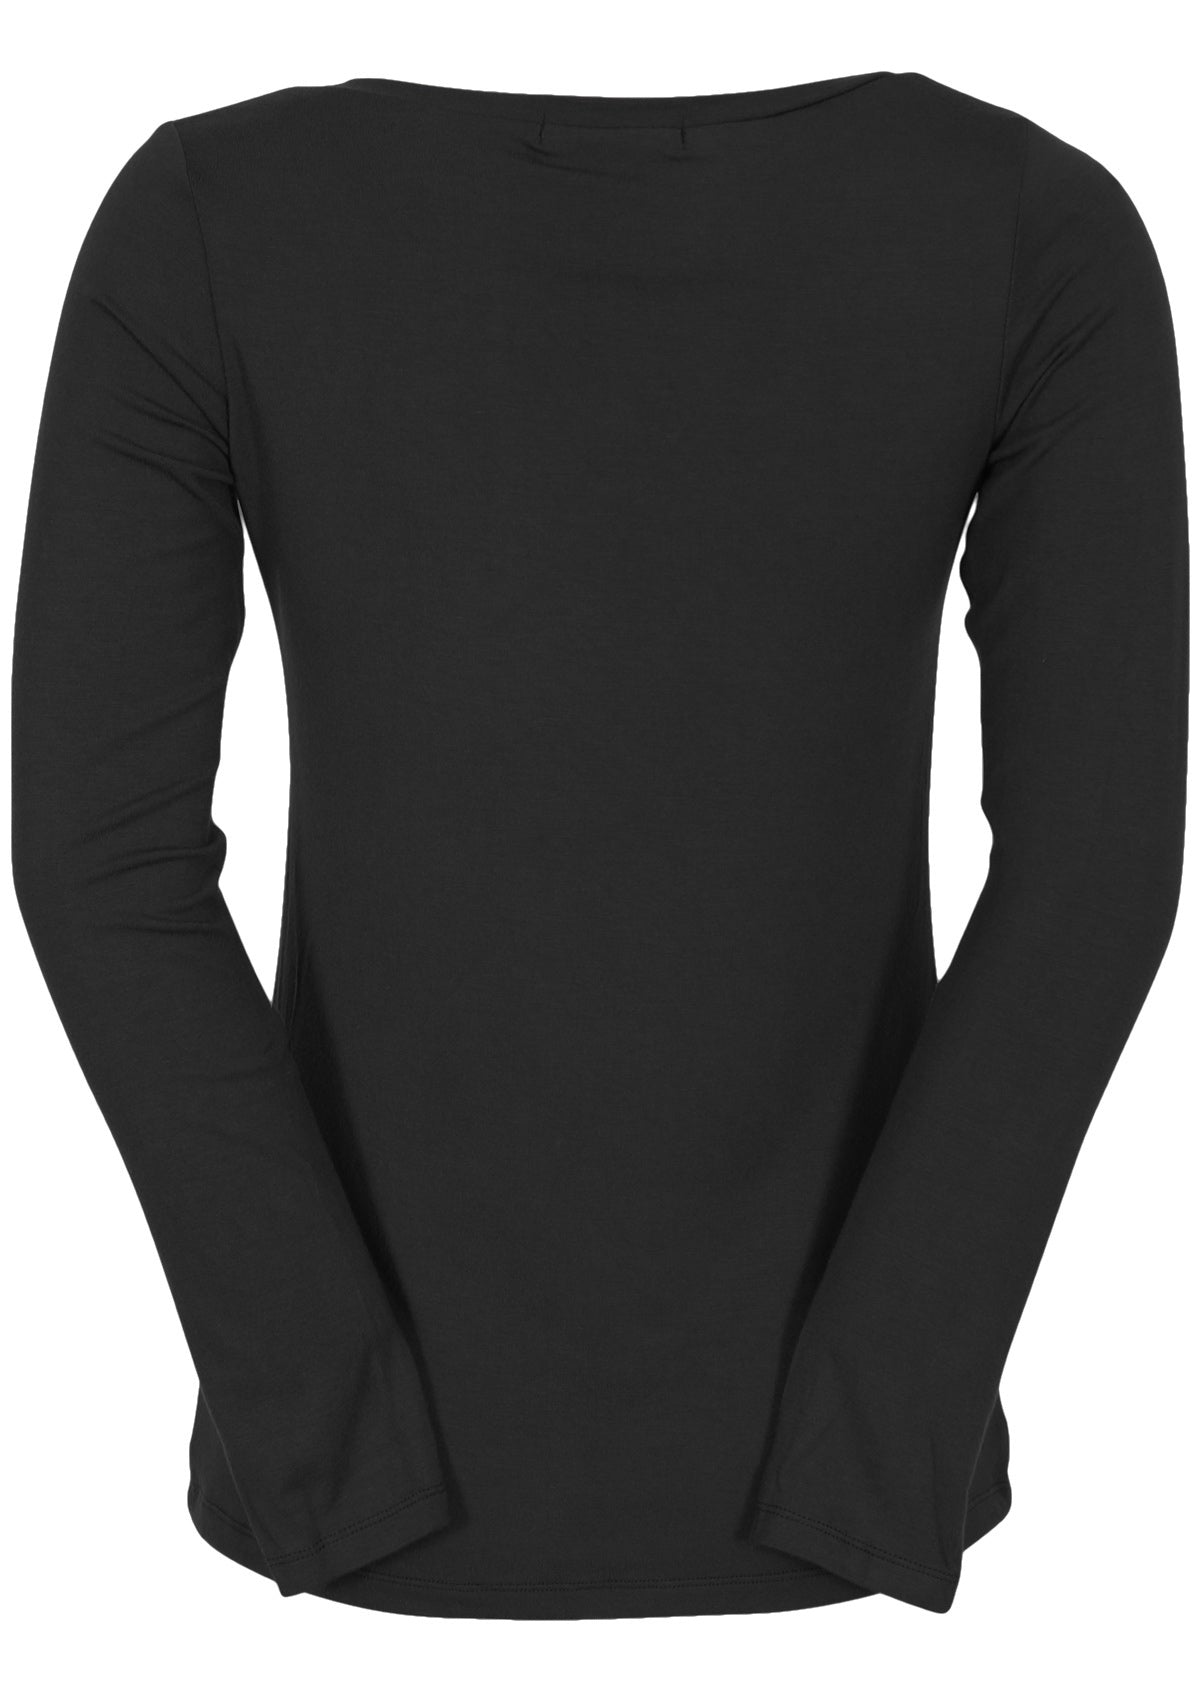 Back view of women's soft stretch women's black long sleeve top.